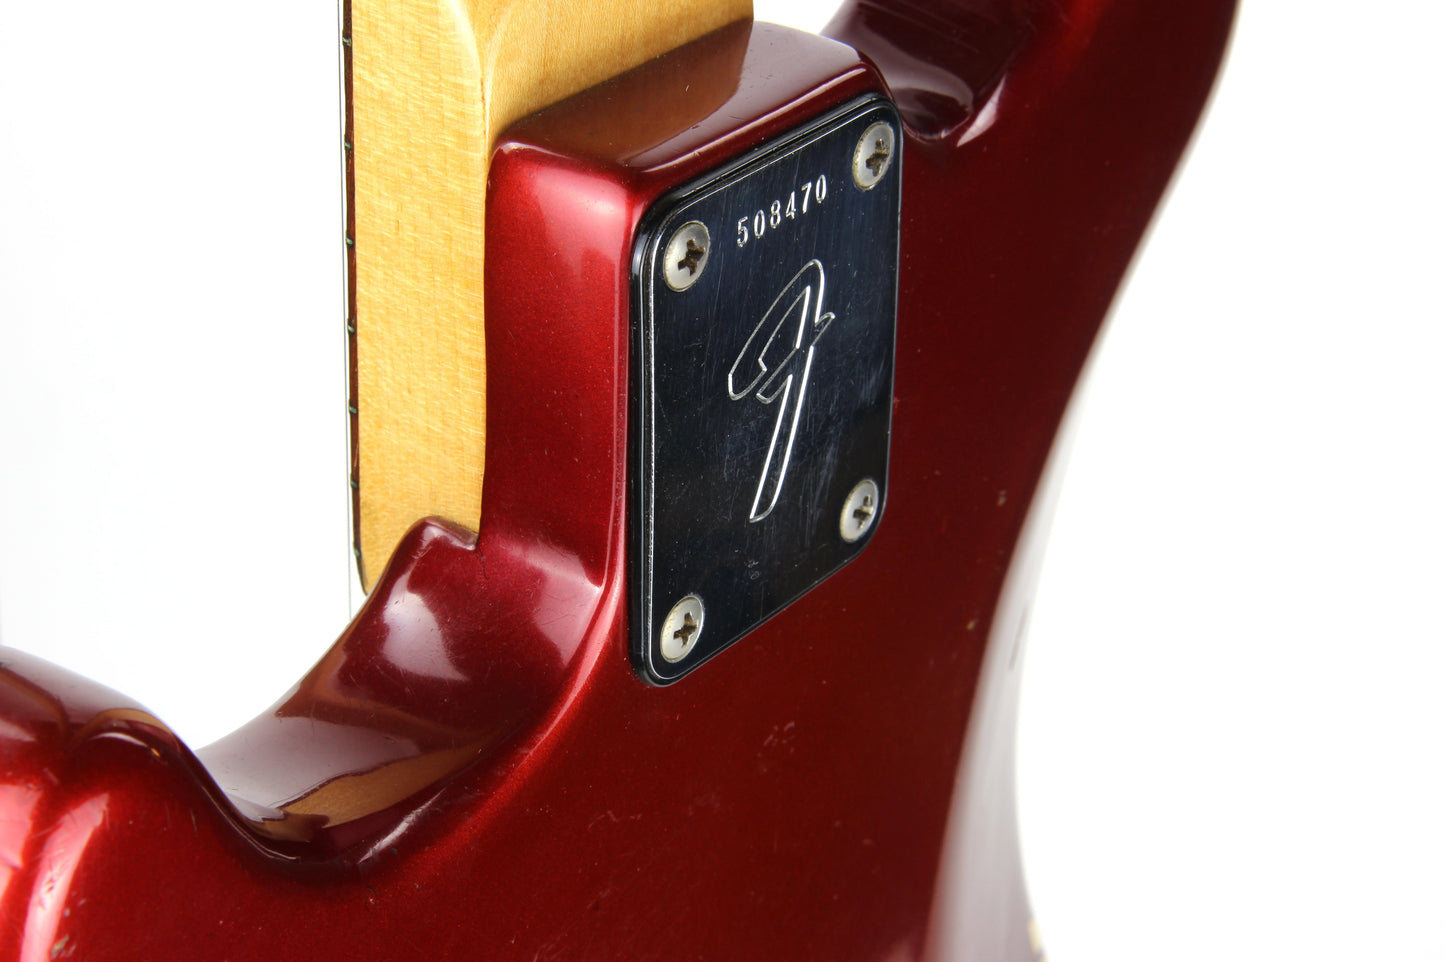 1974 Fender Competition Mustang Candy Apple Red w/ Racing Stripe -- Vintage 1970's Guitar